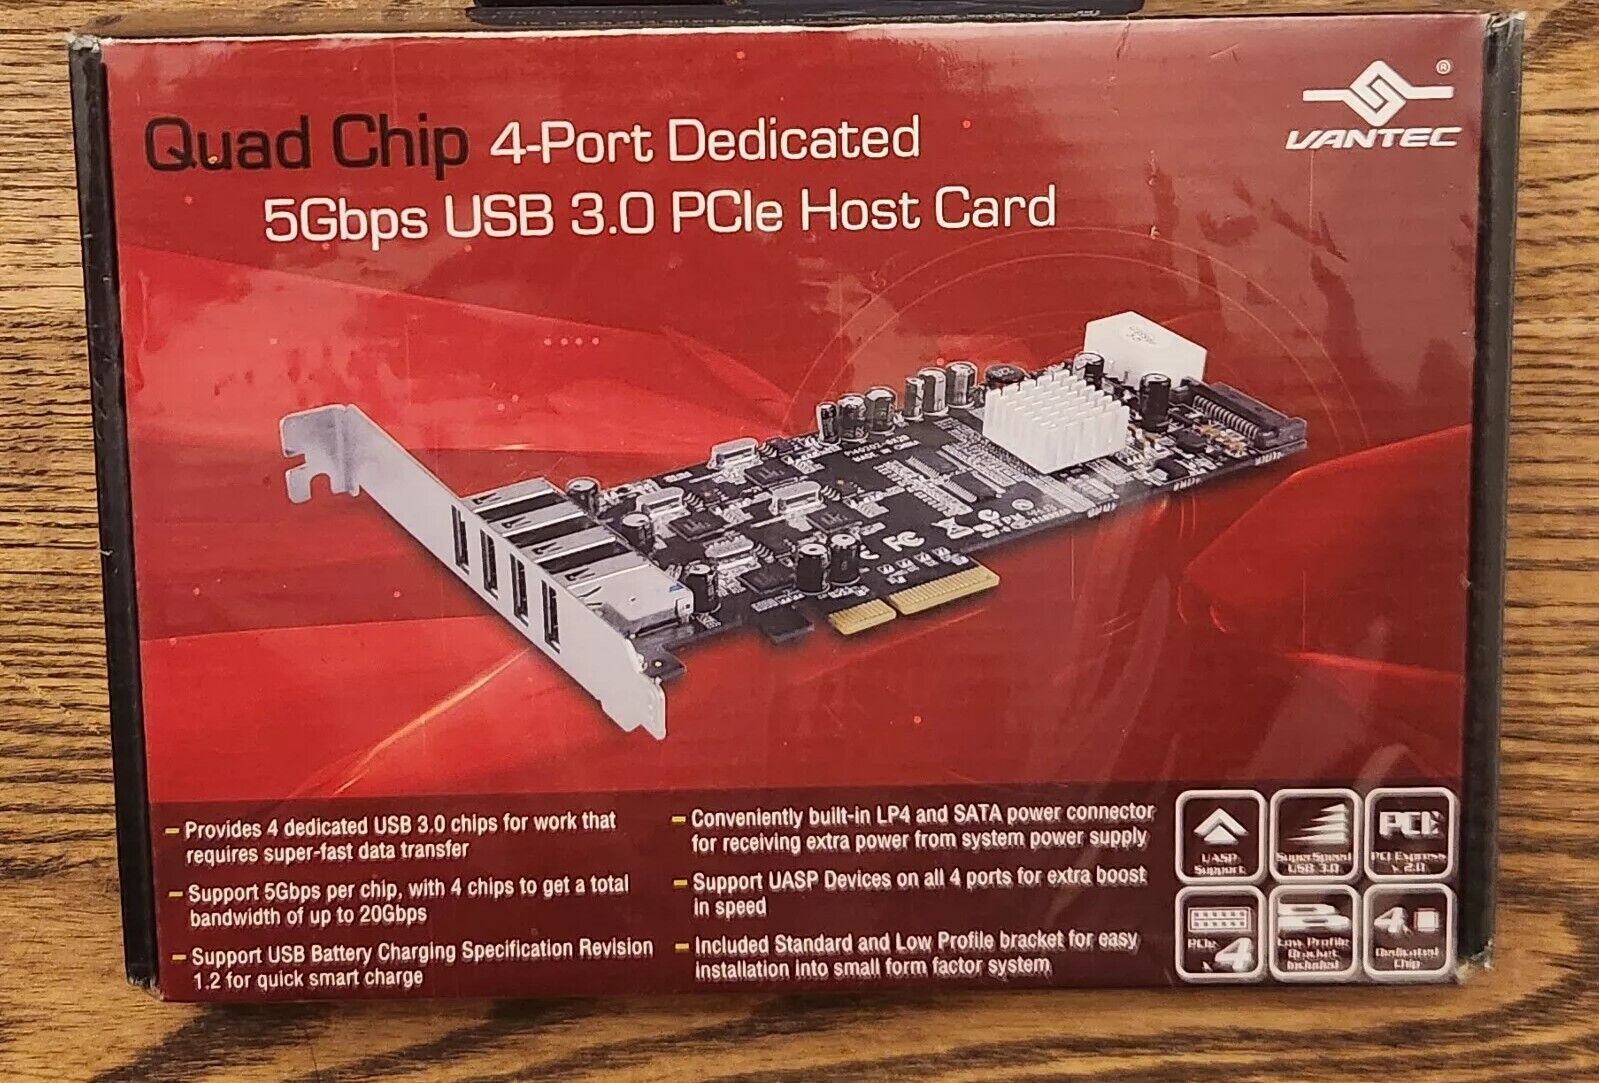 Quad Chip 4-Port Dedicated 5Gbps USB 3.0 Pcie Host Card (UGT-PCE430-4C) Sealed